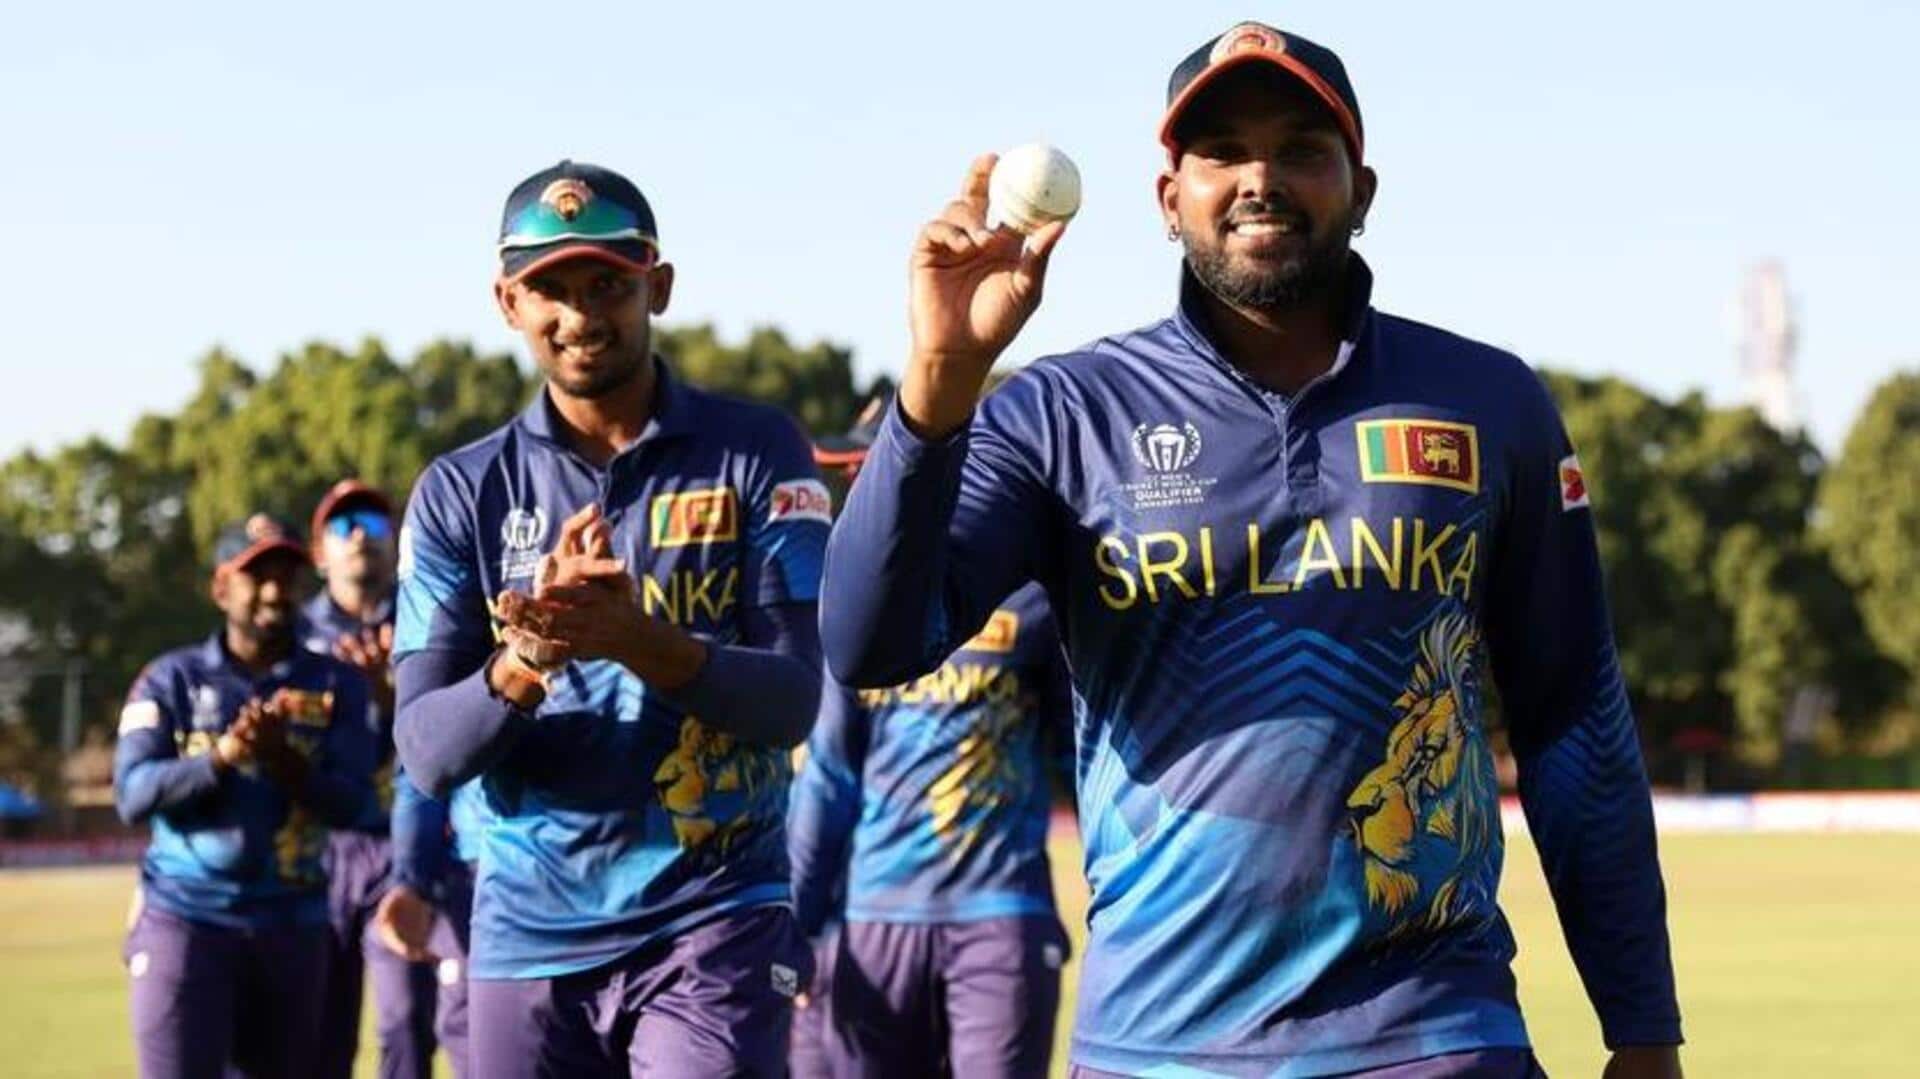 Sri Lanka equaled these 4 big teams together, a feat in ODI cricket